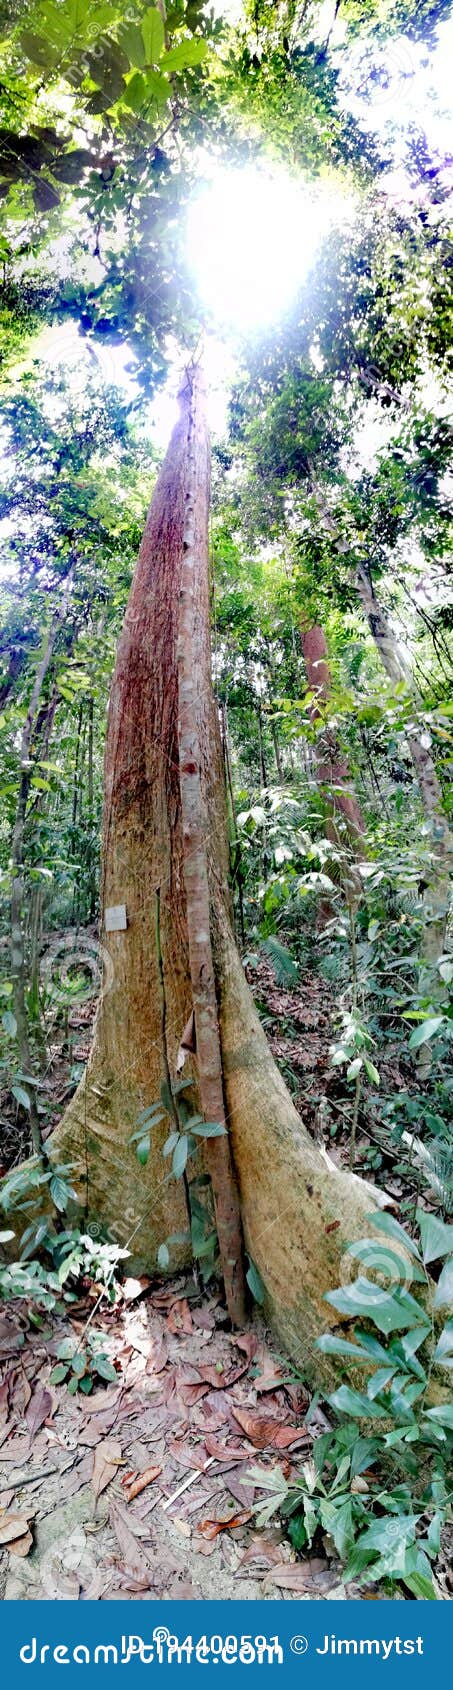 emergent tree in tropical rainforest